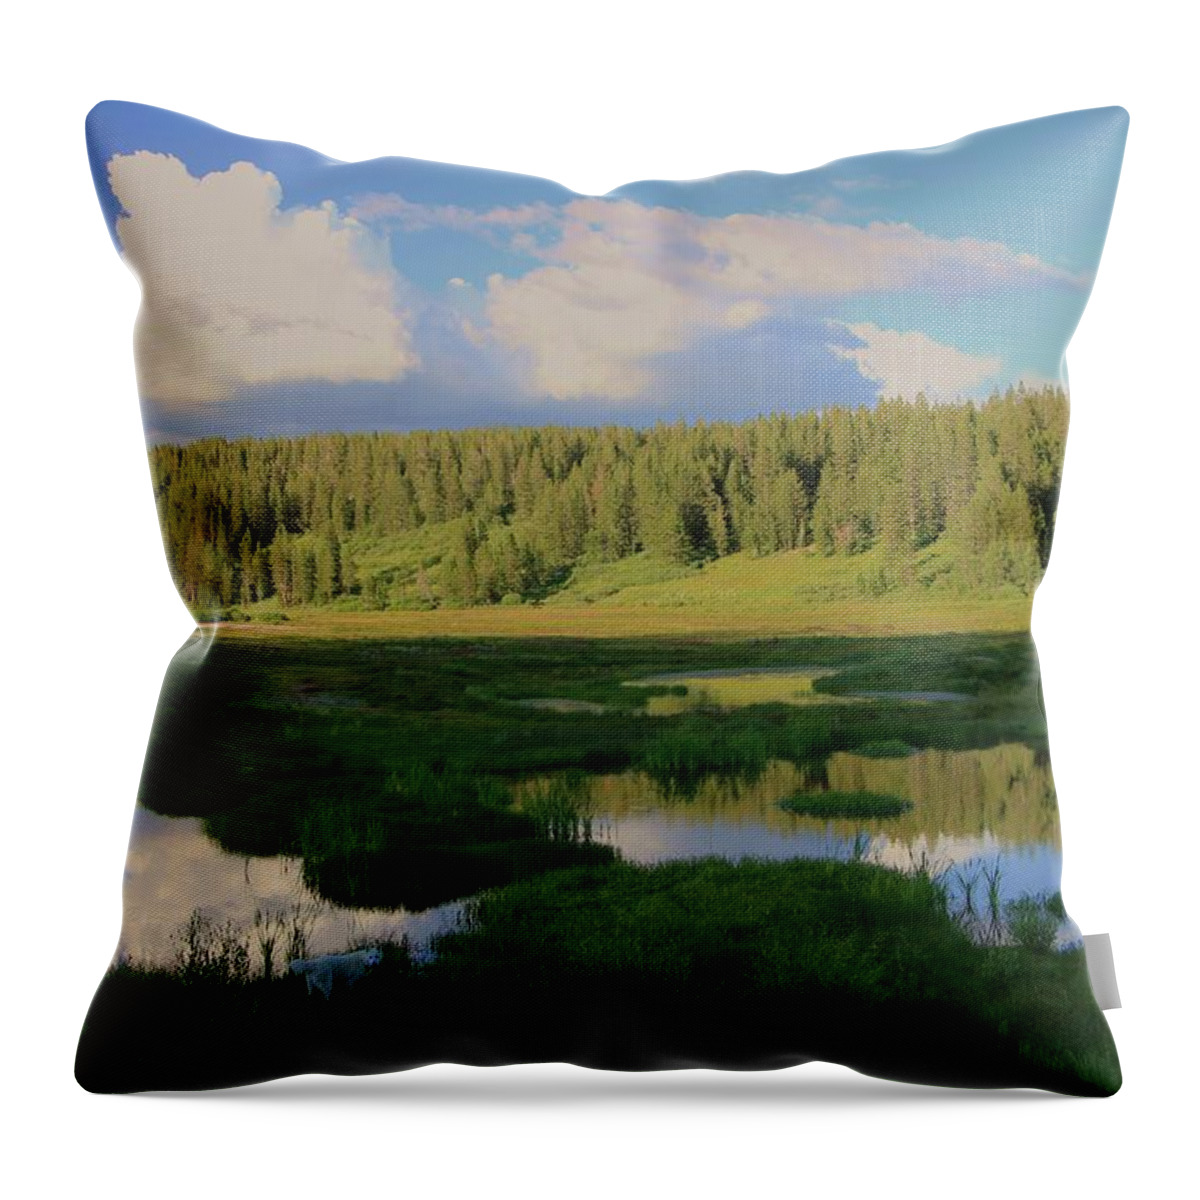 Incline Lake Throw Pillow featuring the photograph What's Left Of A Lake by Sean Sarsfield